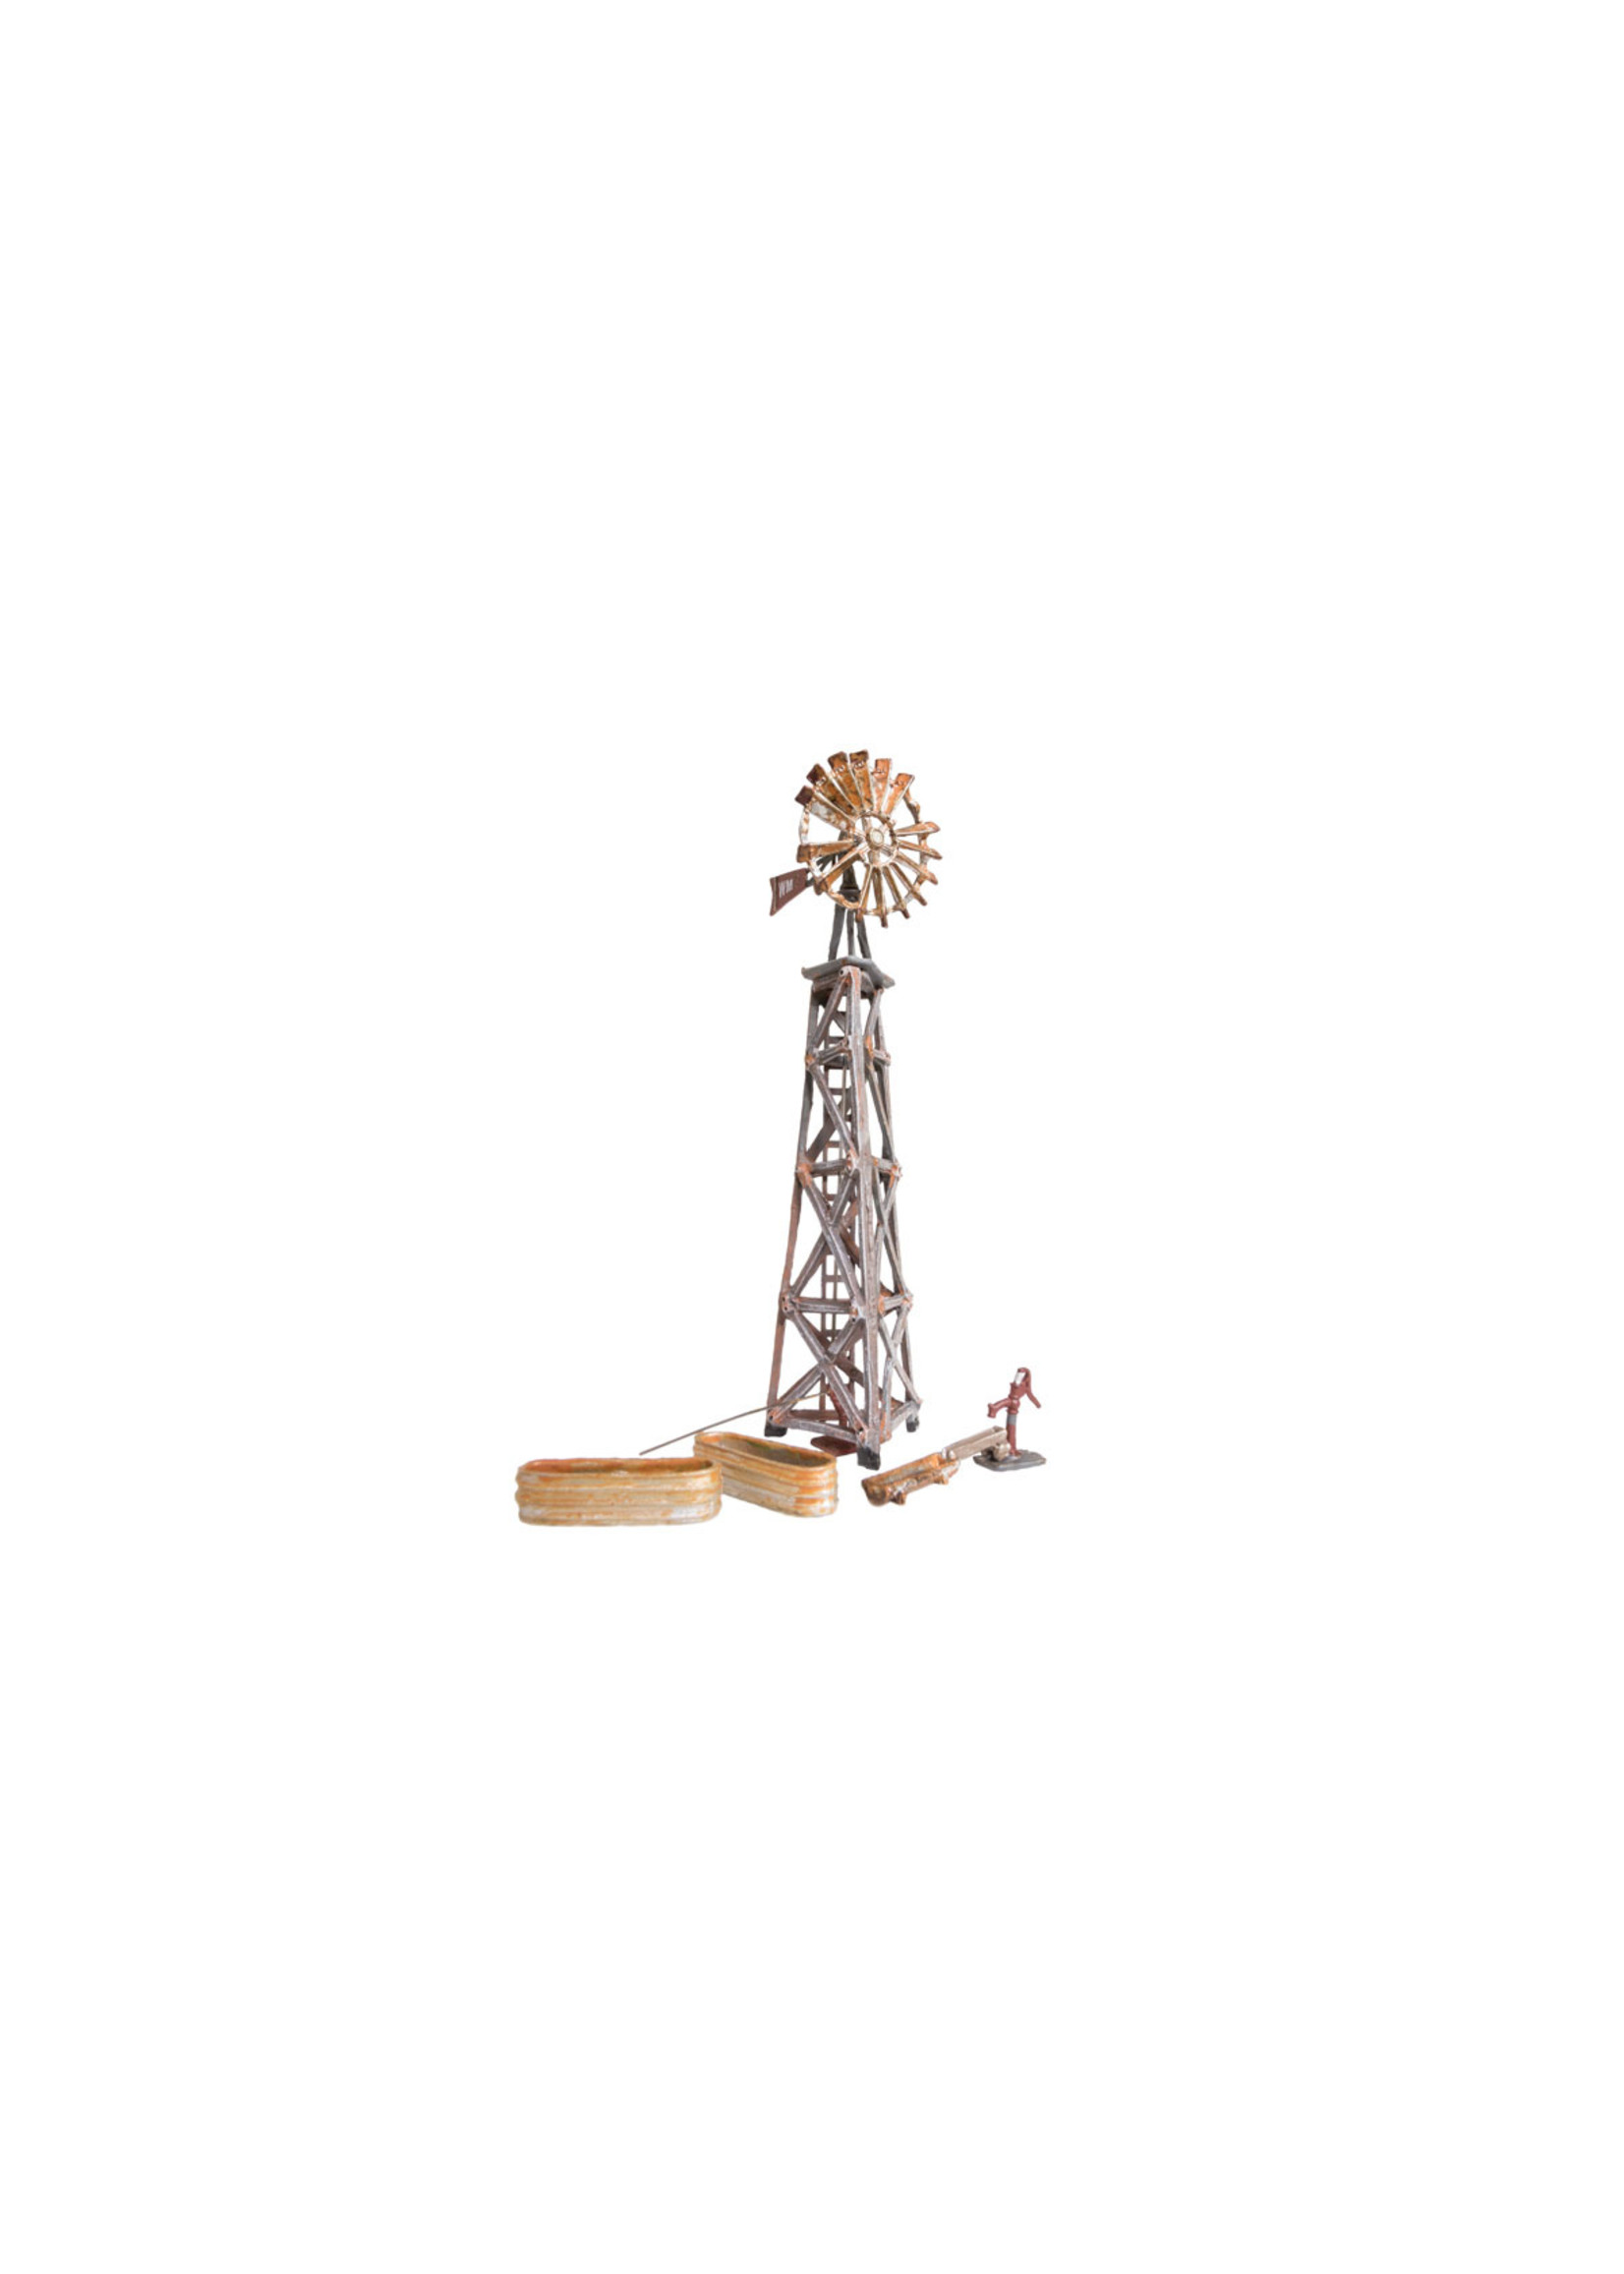 Woodland Scenics BR4936 - N Scale Old Windmill